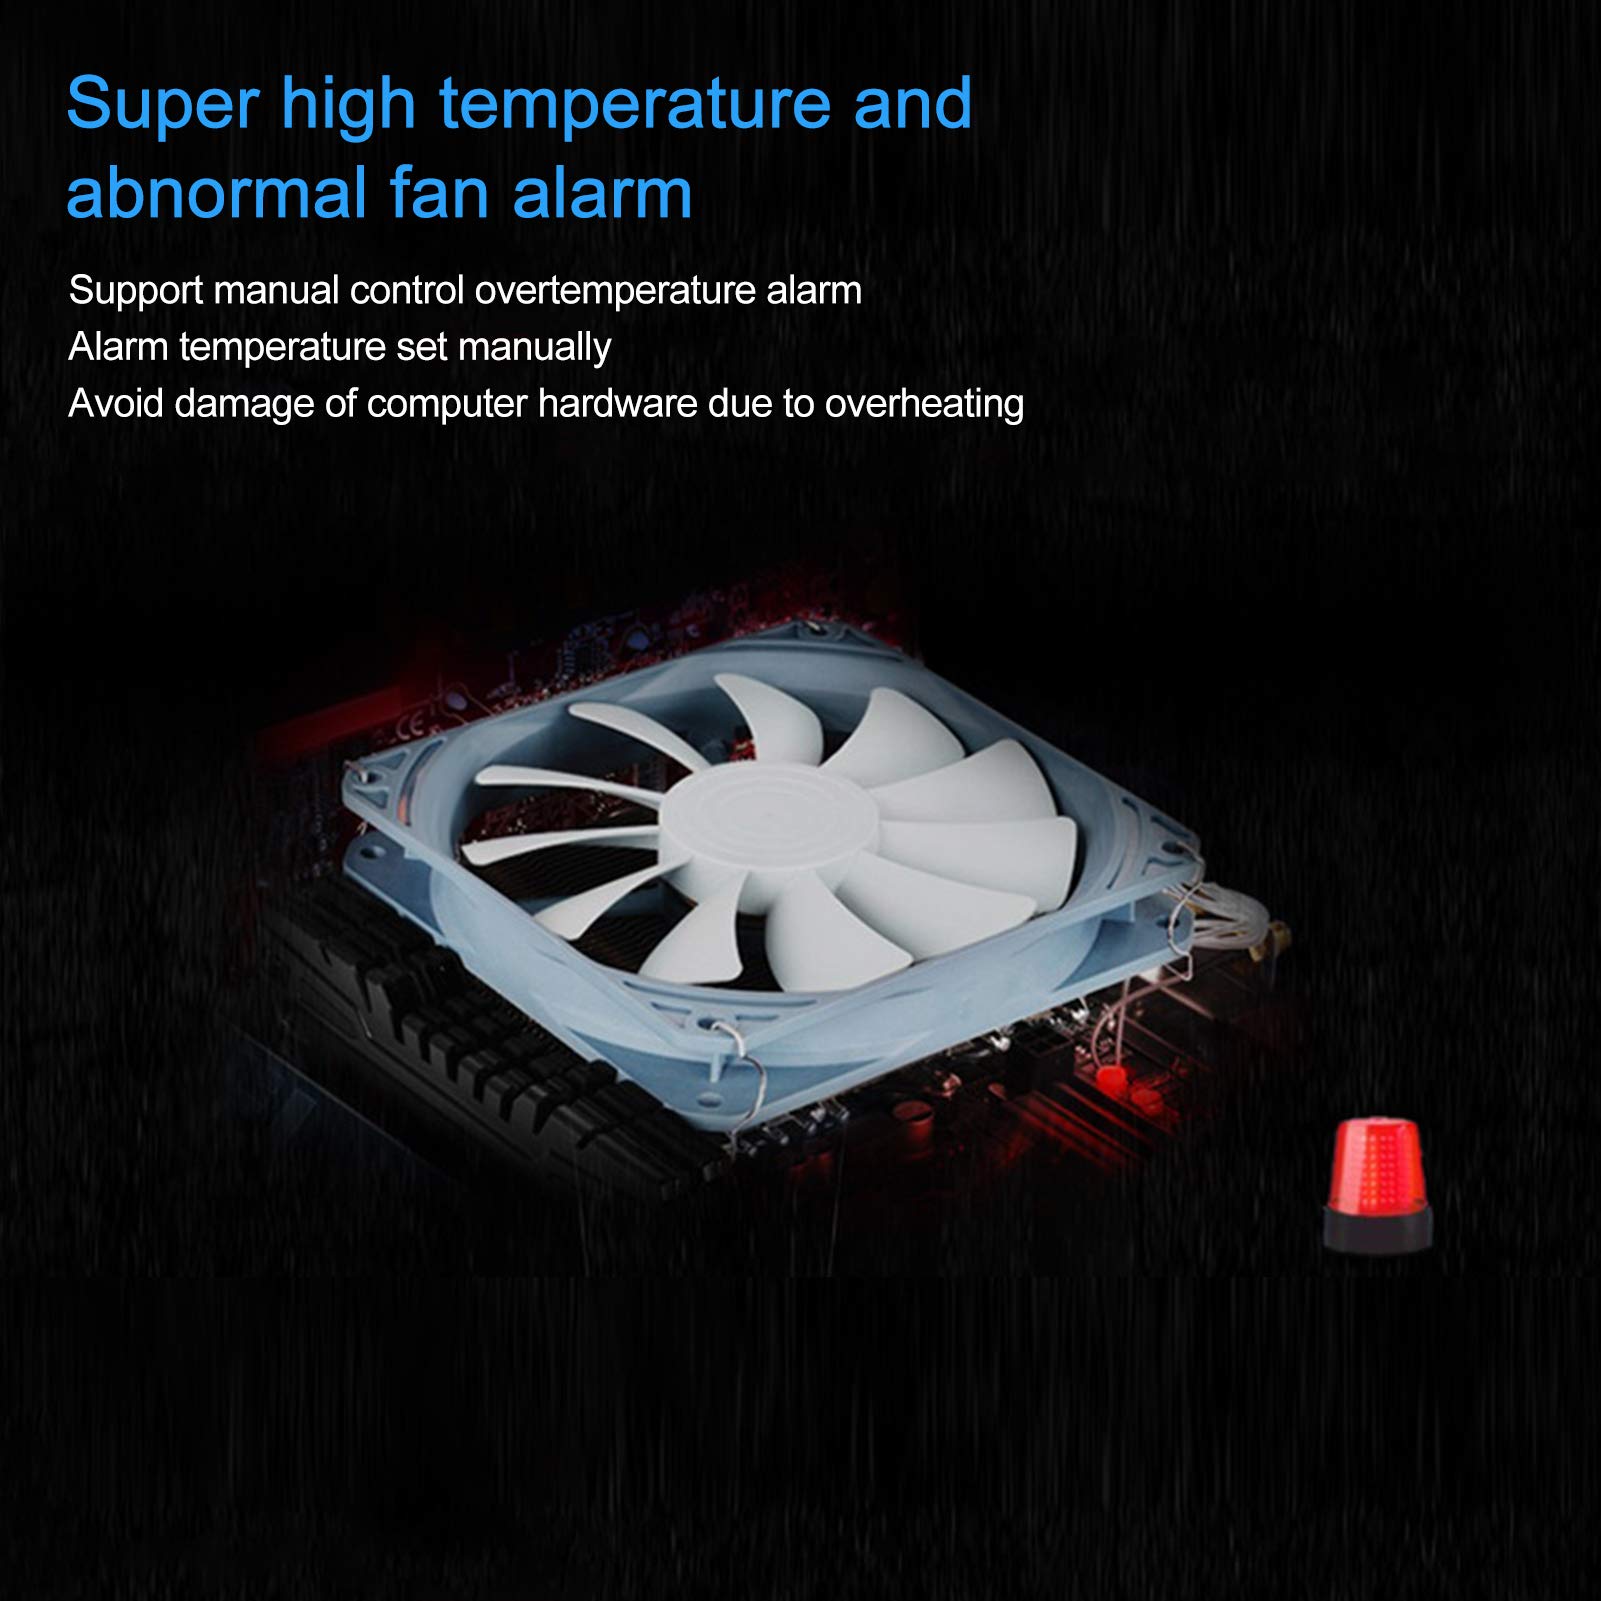 A computer with a fan and thermometer icon showing overheating.